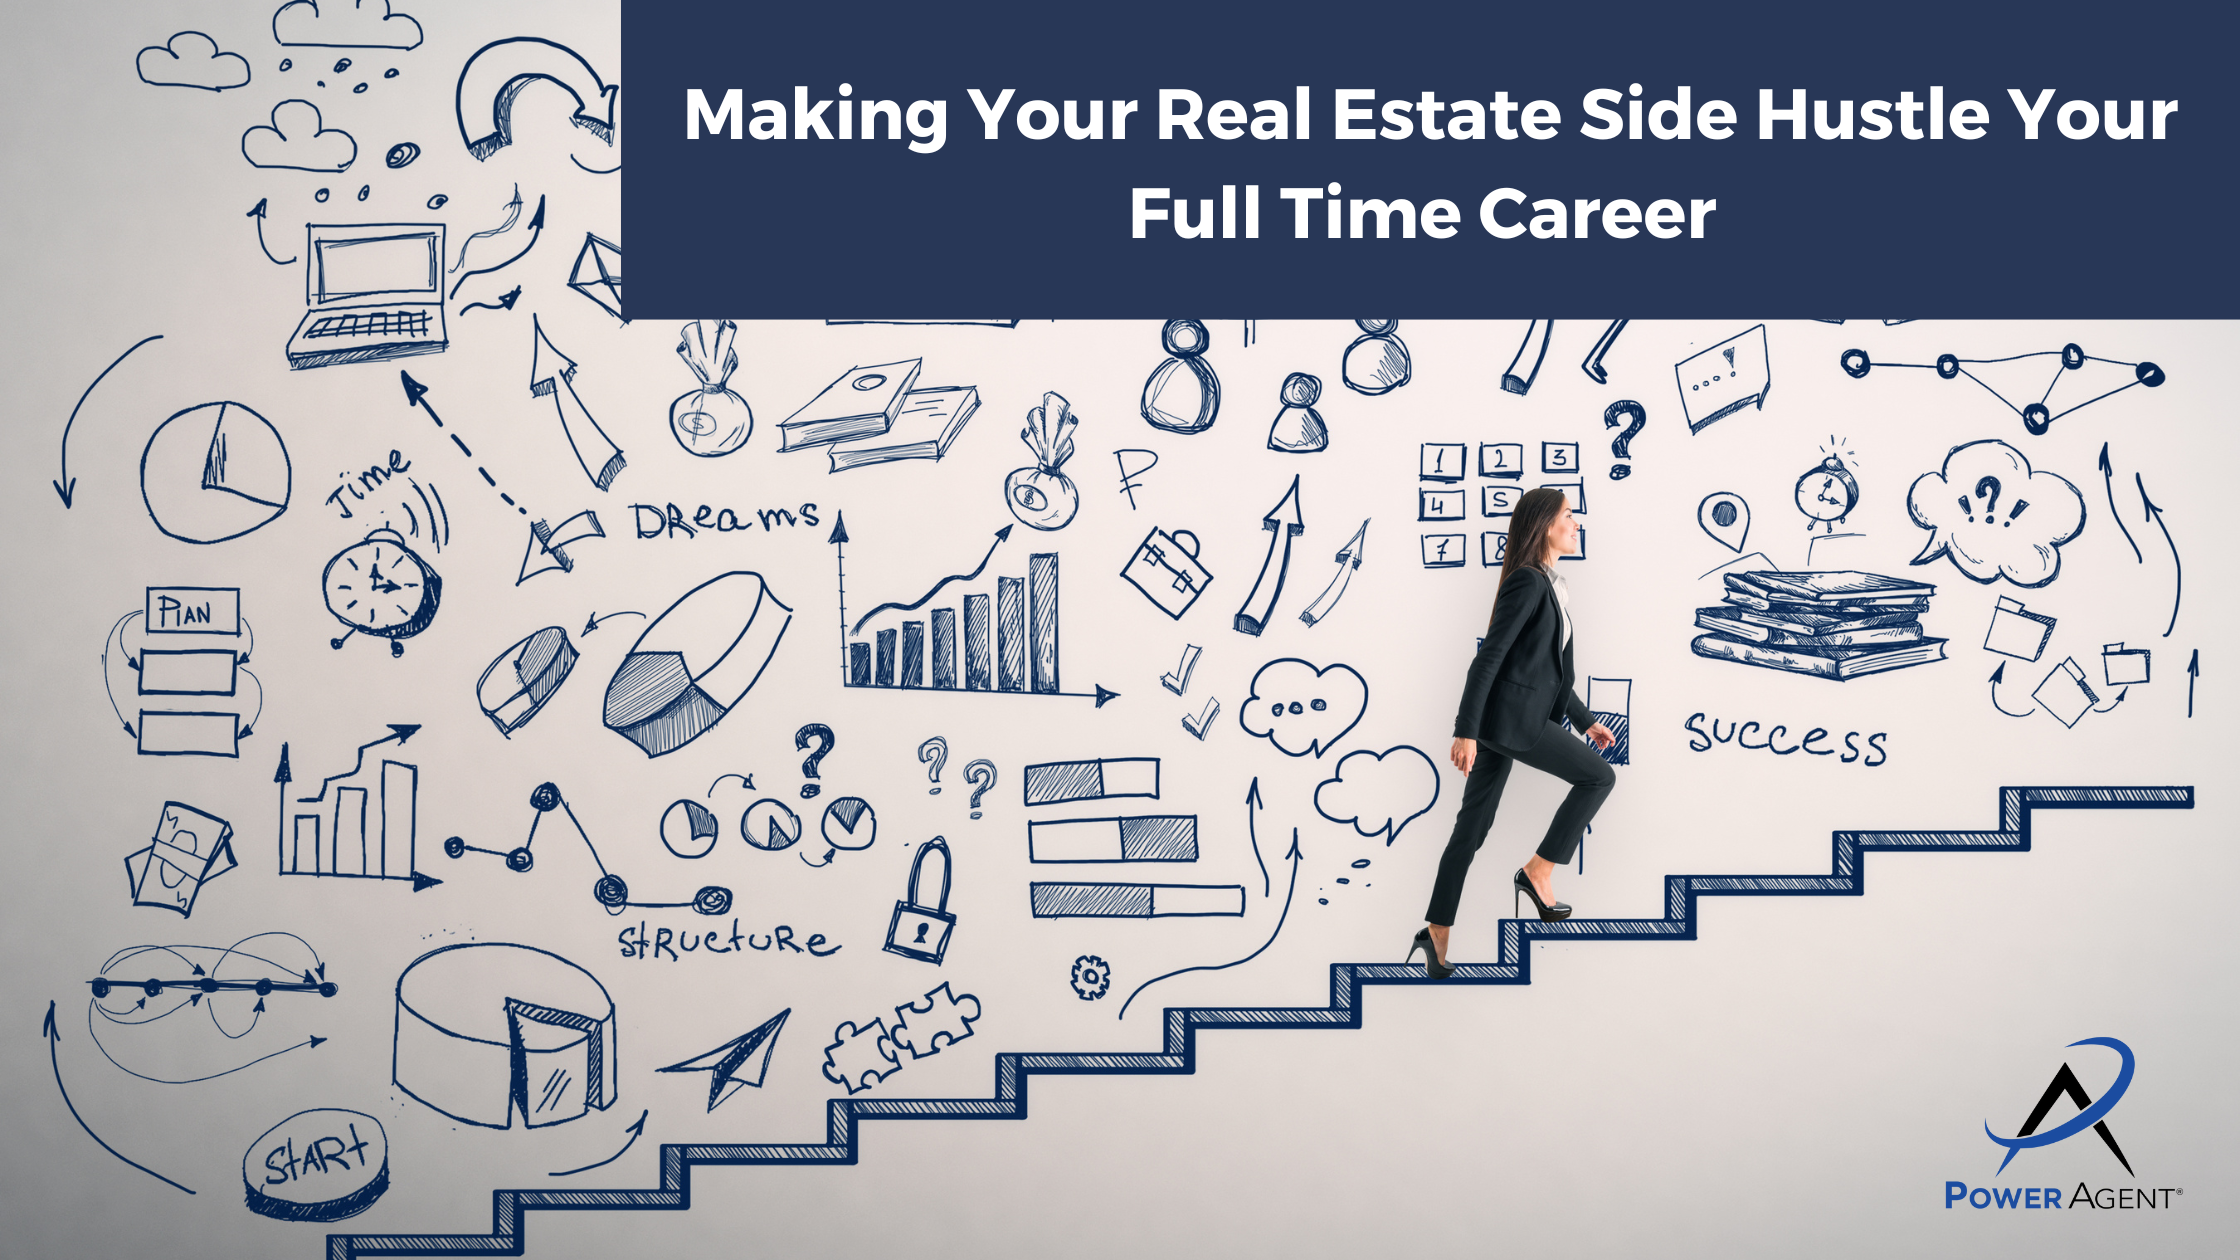 Making Your Real Estate Side Hustle Your Full Time Career